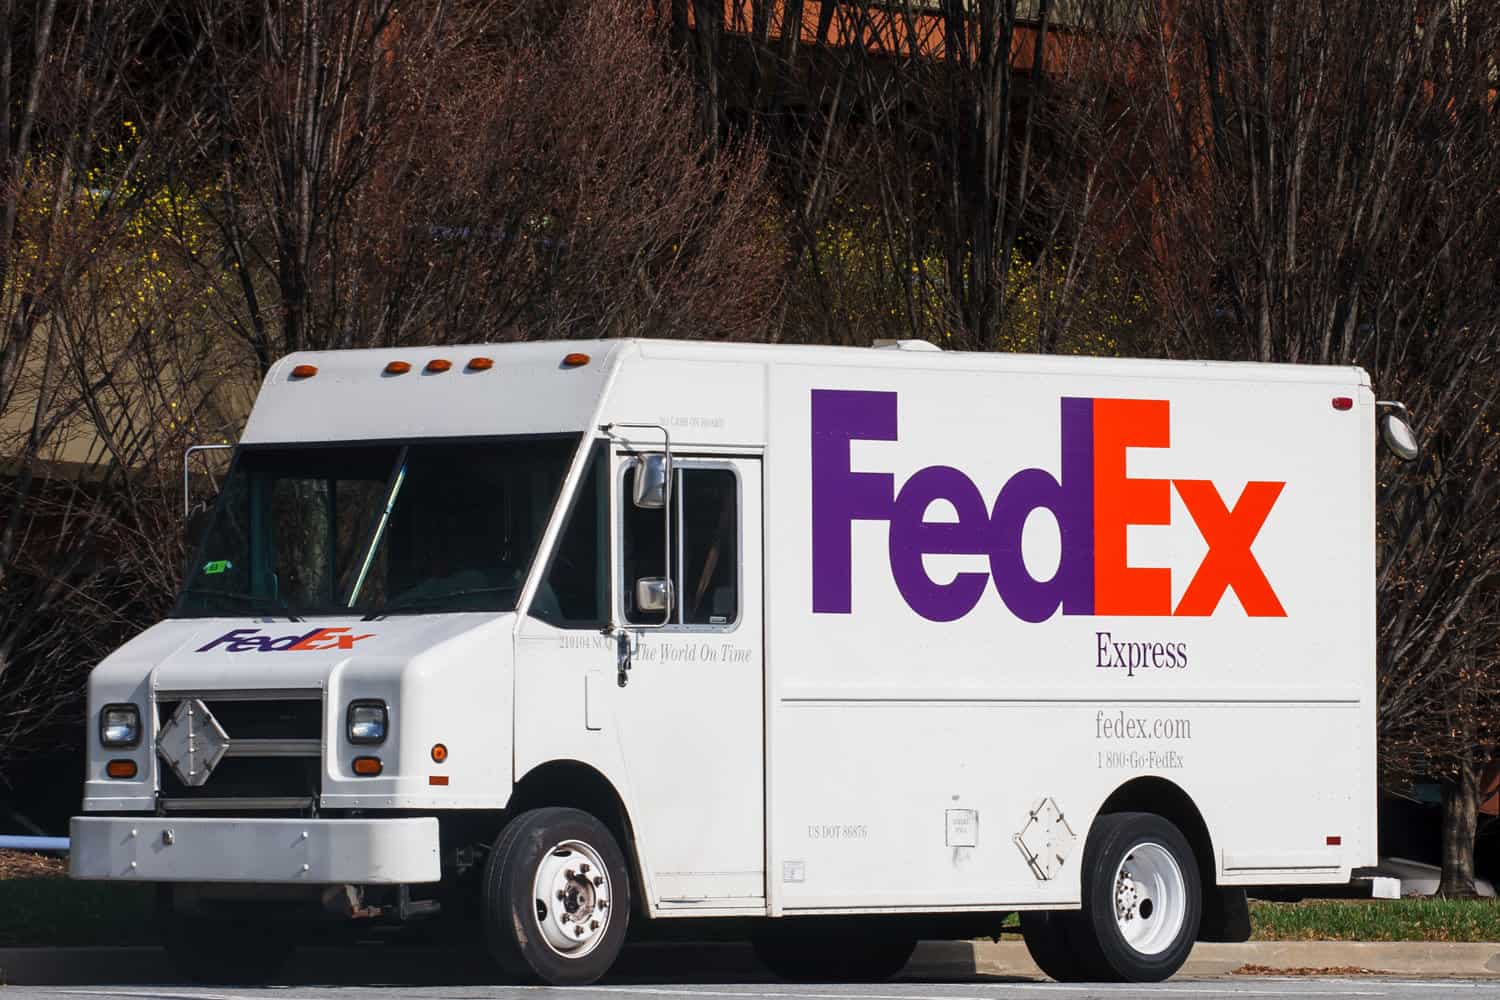 FedEx Corporation is an American delivery services company headquartered in Memphis, Tennessee.The company is known for its overnight shipping service. - FedEx Home Delivery Vs Ground What's The Difference